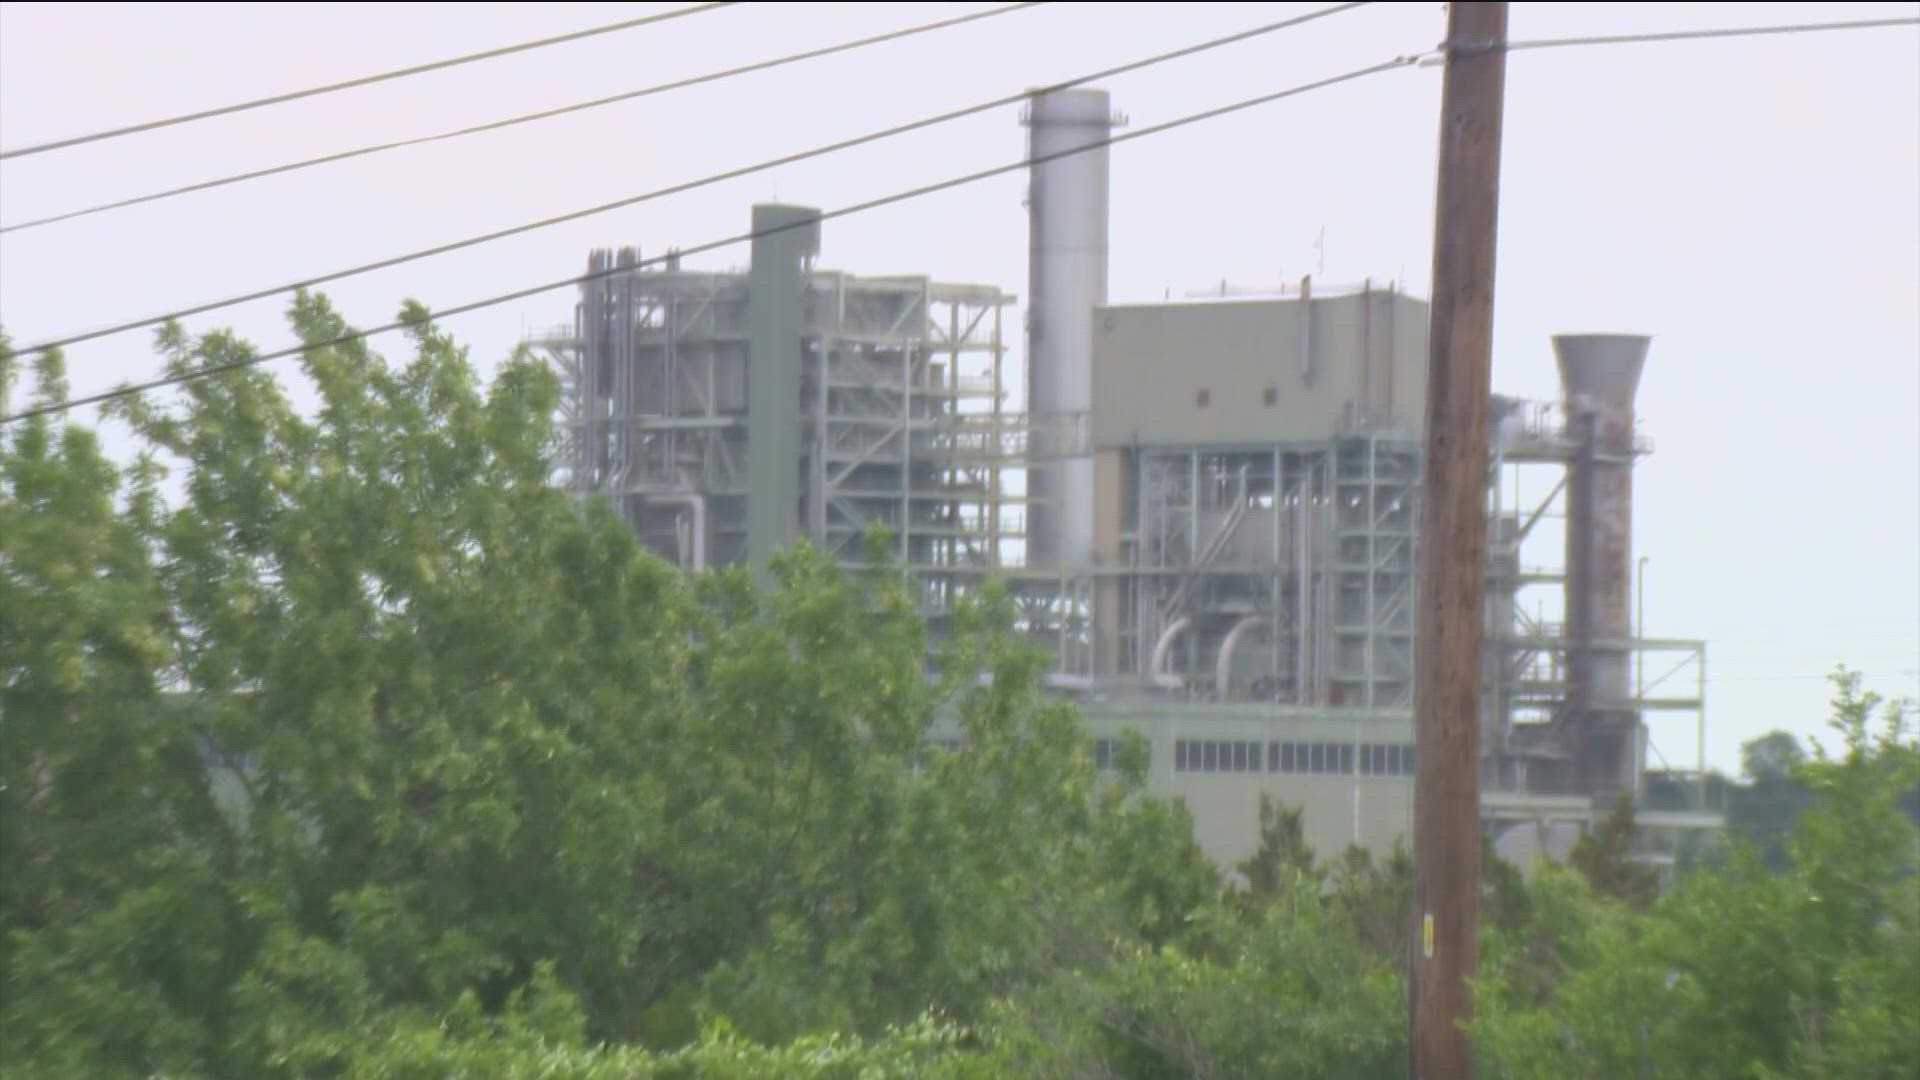 About a week after rising concerns of high demand, ERCOT on Friday is again asking Texans to conserve power.